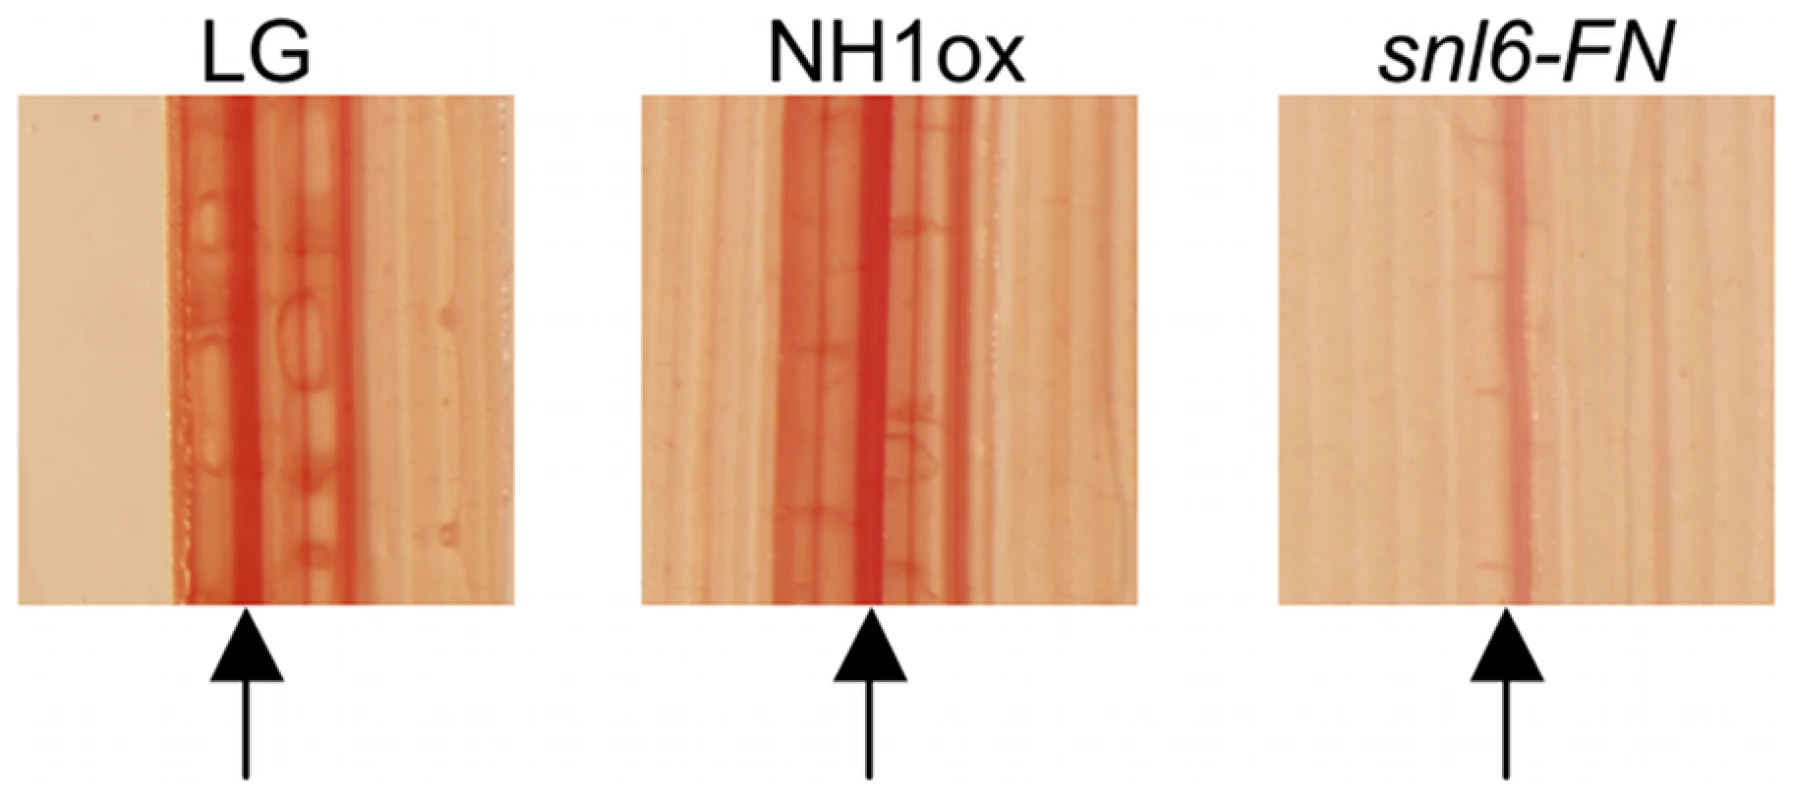 Characterization of the role of <i>Snl6</i> in the phenylpropanoid pathway.